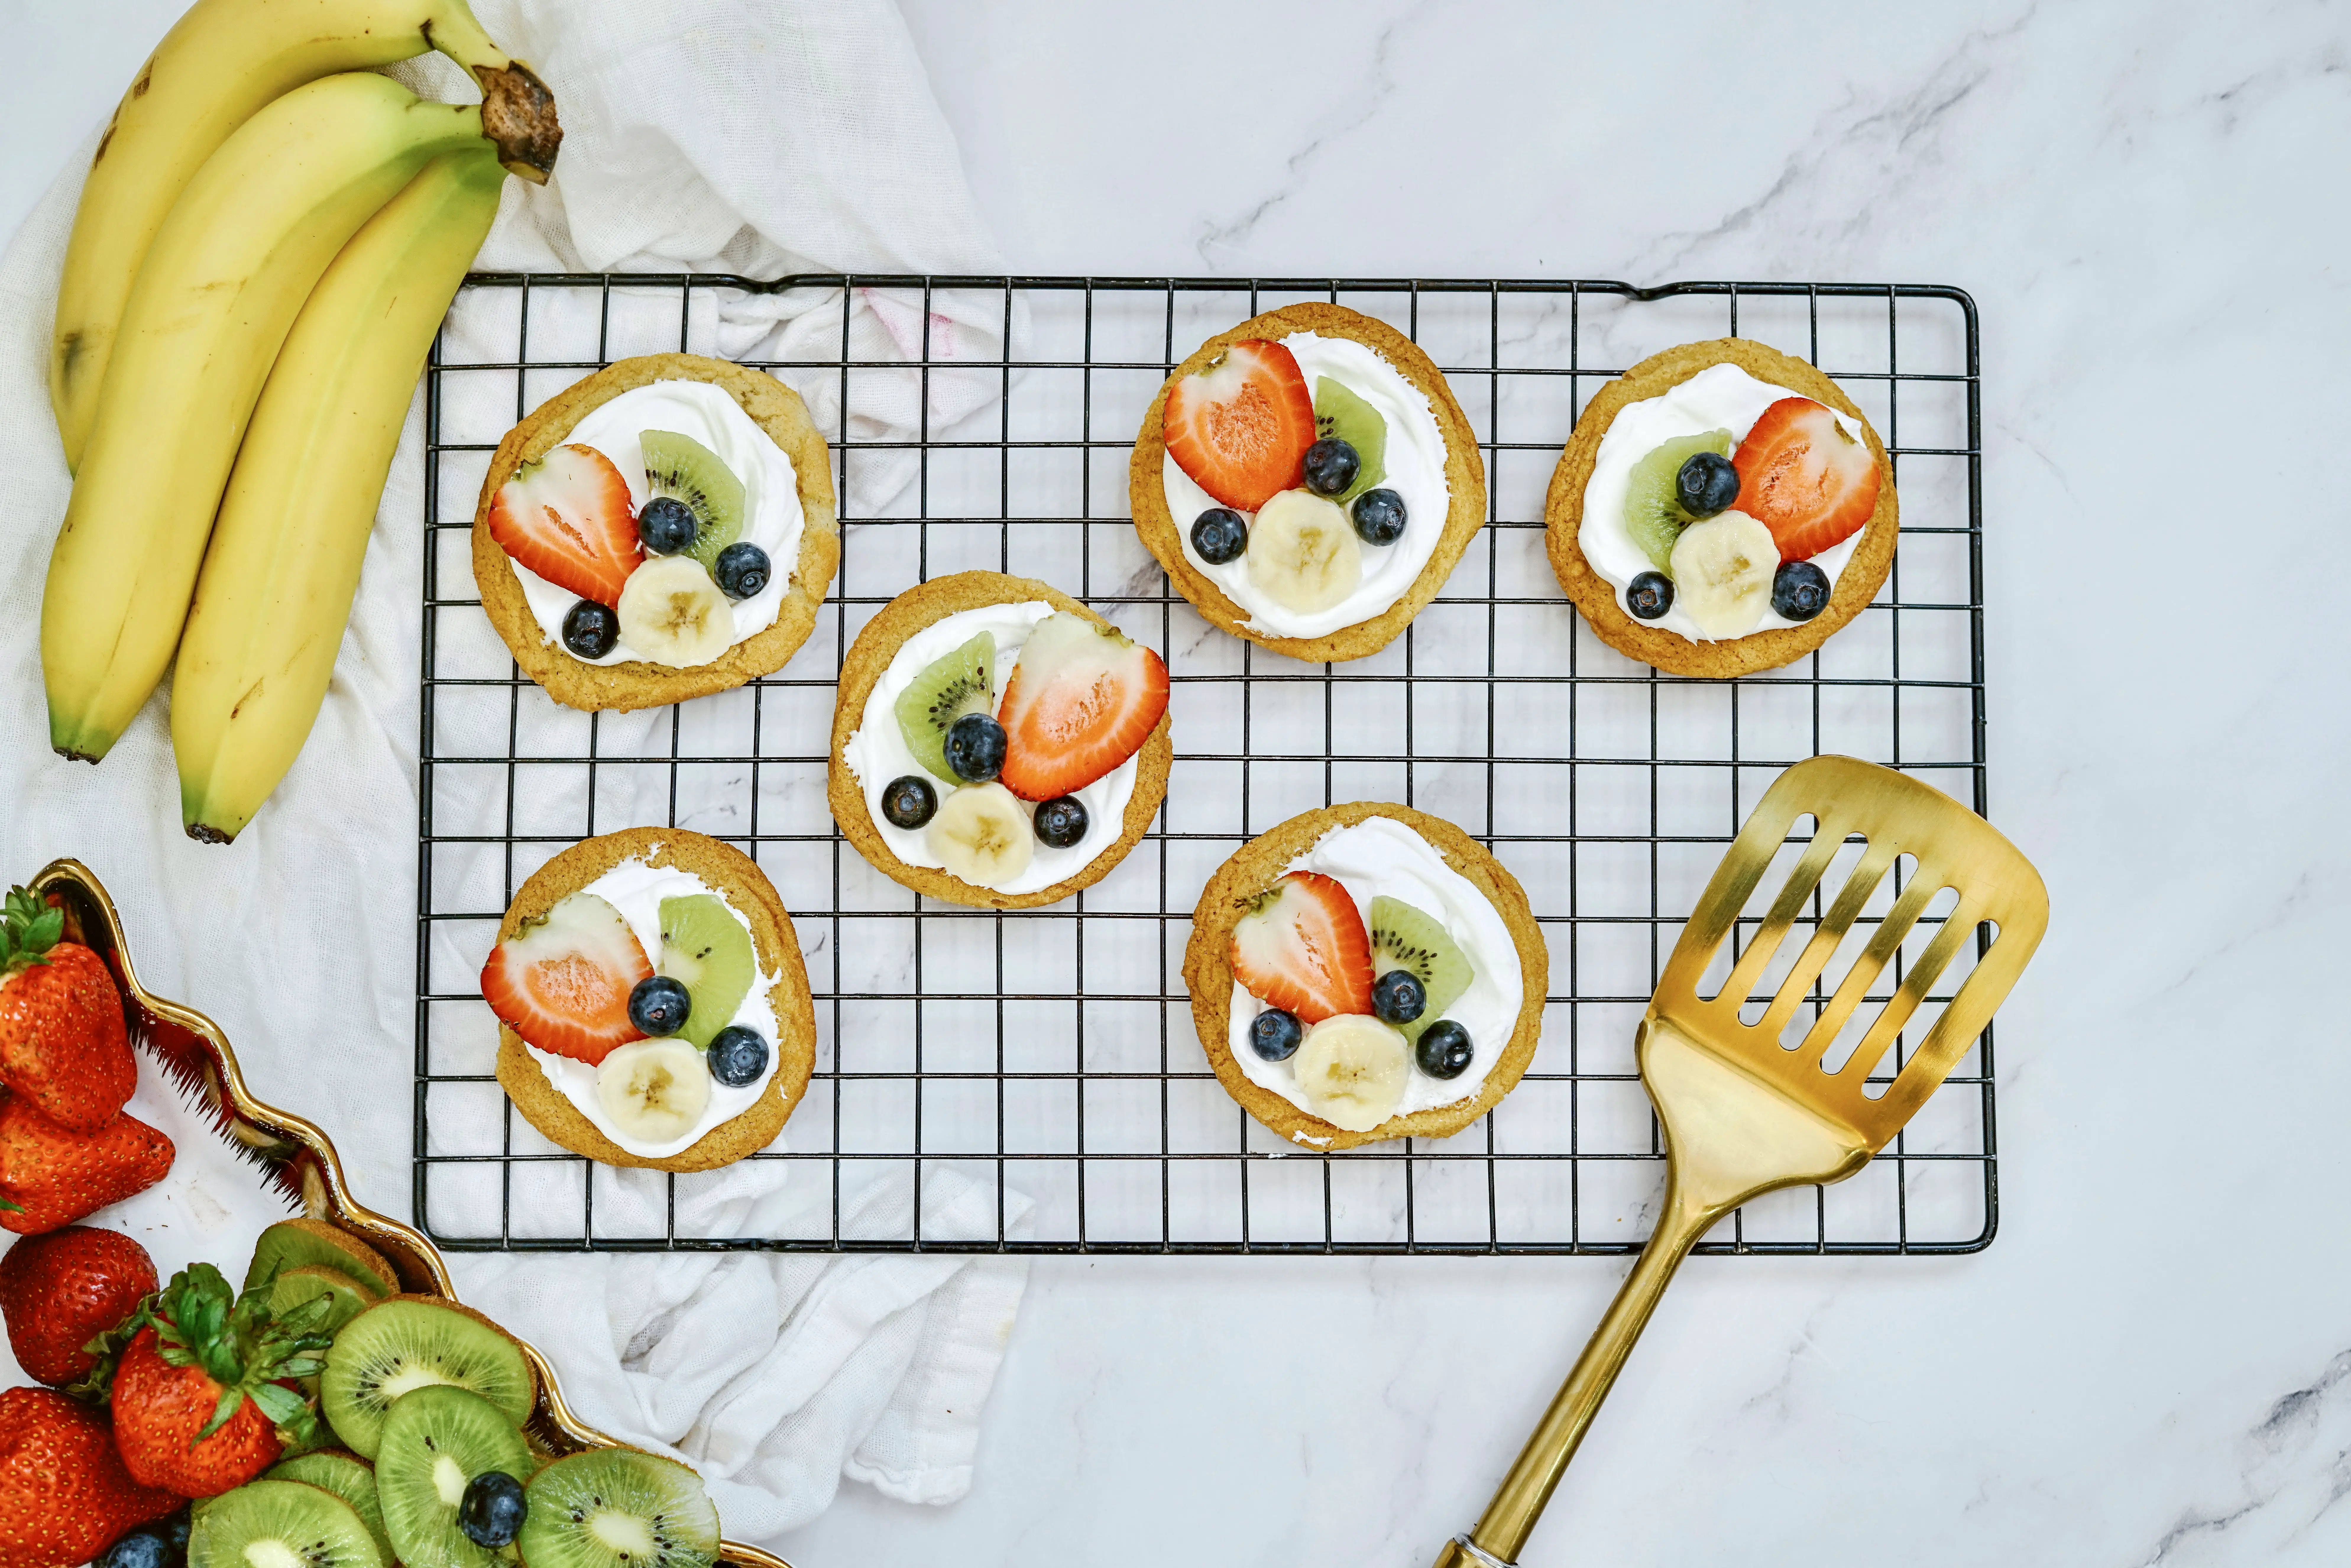 On the tiny fruit pizzas, layer the strawberry halves, kiwi slices, bananas, and blueberries.